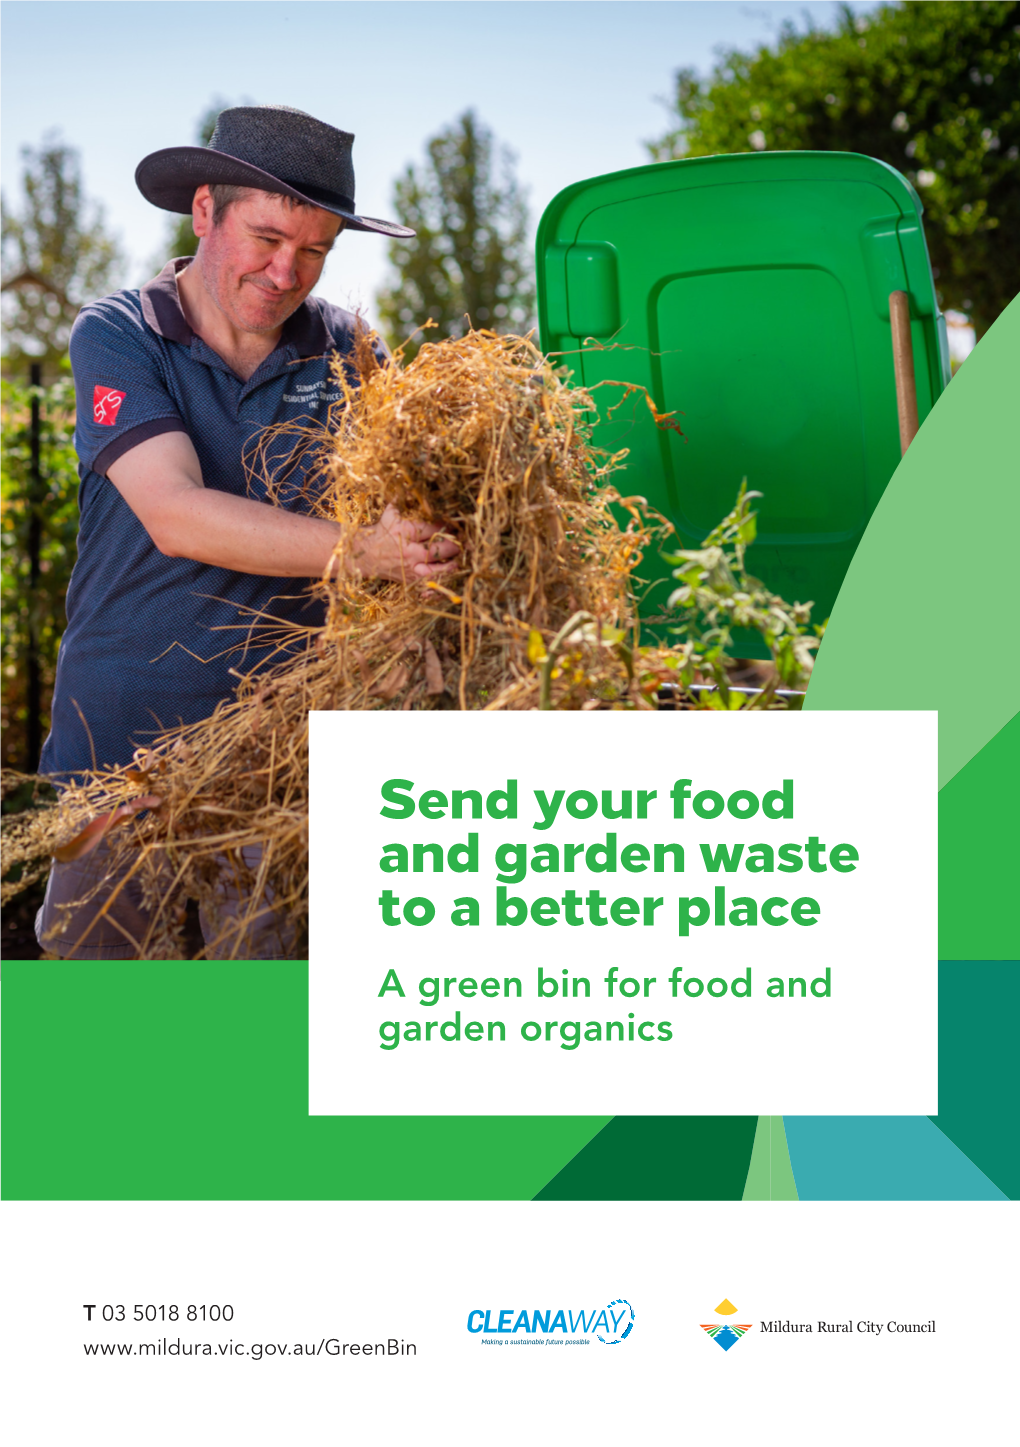 Send Your Food and Garden Waste to a Better Place a Green Bin for Food and Garden Organics